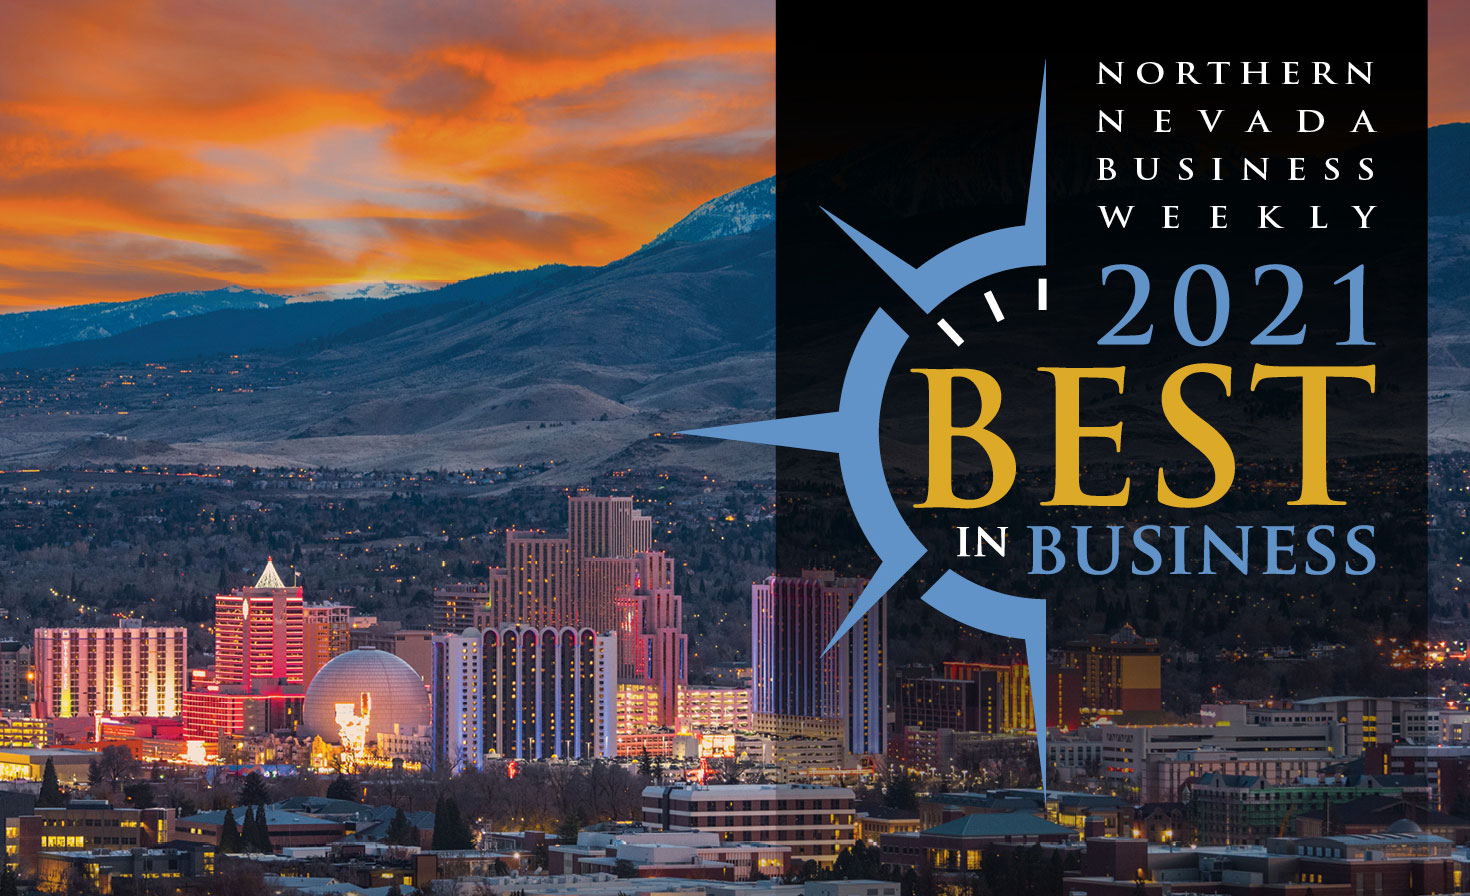 Northern Nevada Business Weekly's Best of 2021